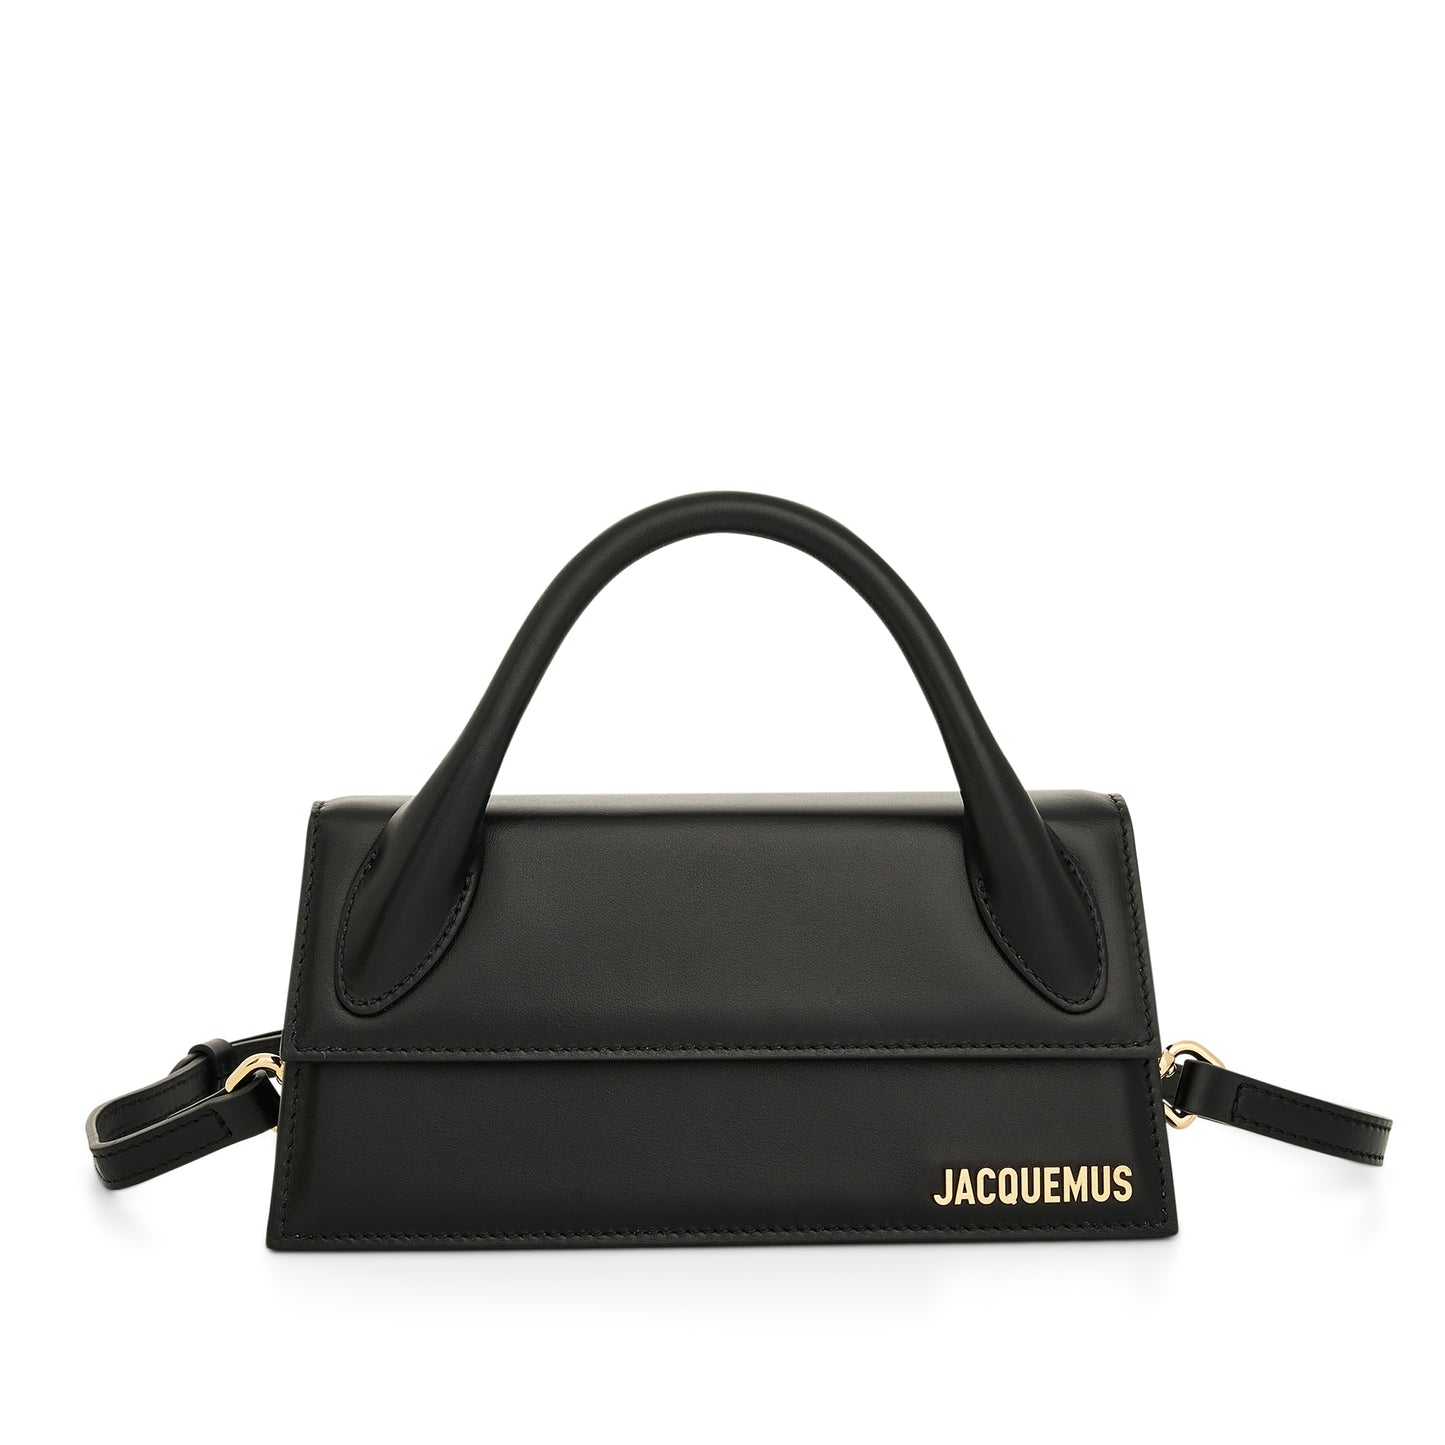 Le Chiquito Long Leather Bag in Black